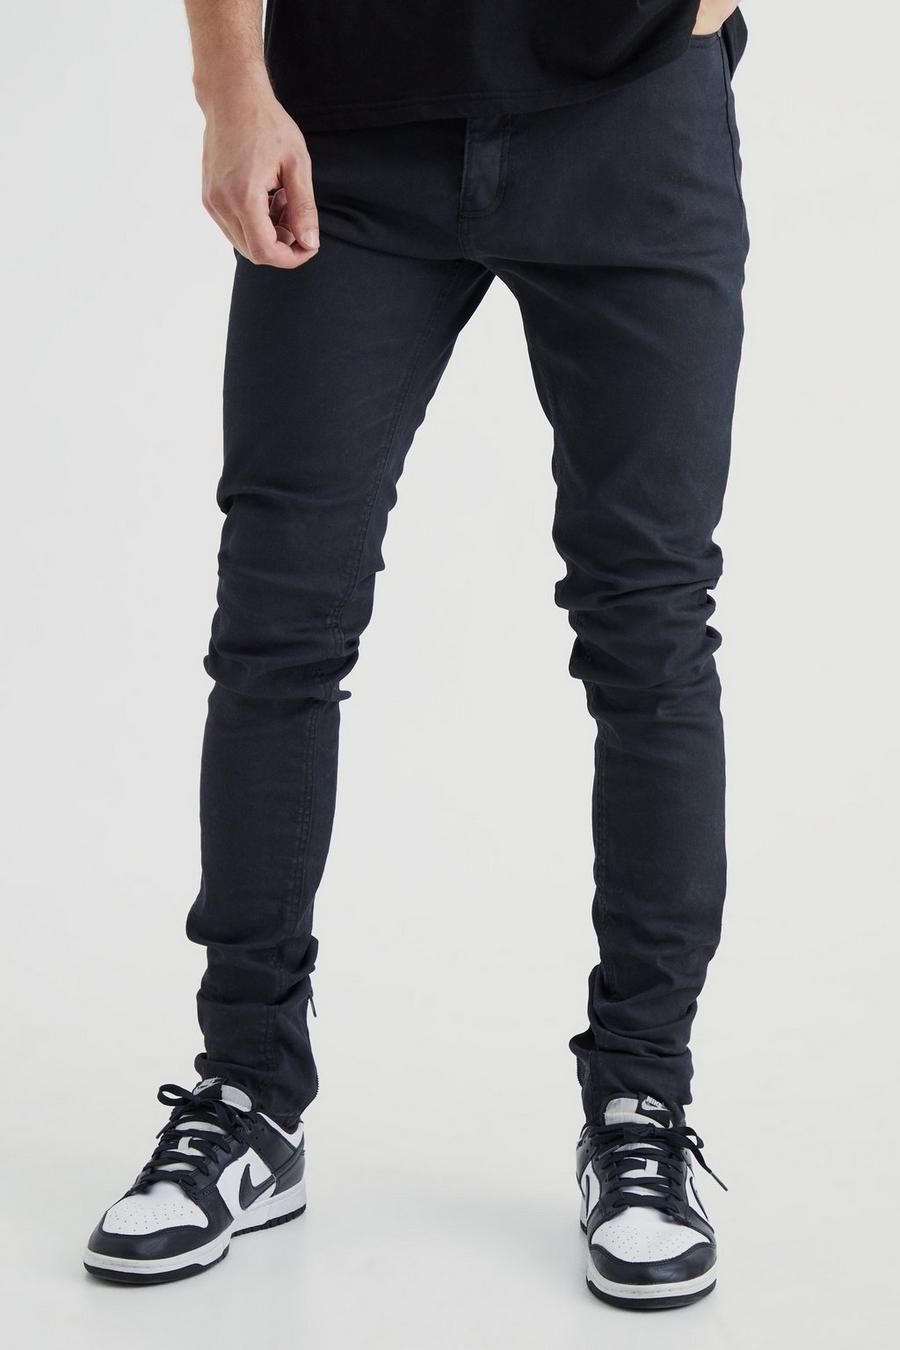 Black Tall Skinny Stacked Zip Gusset Coated Jean